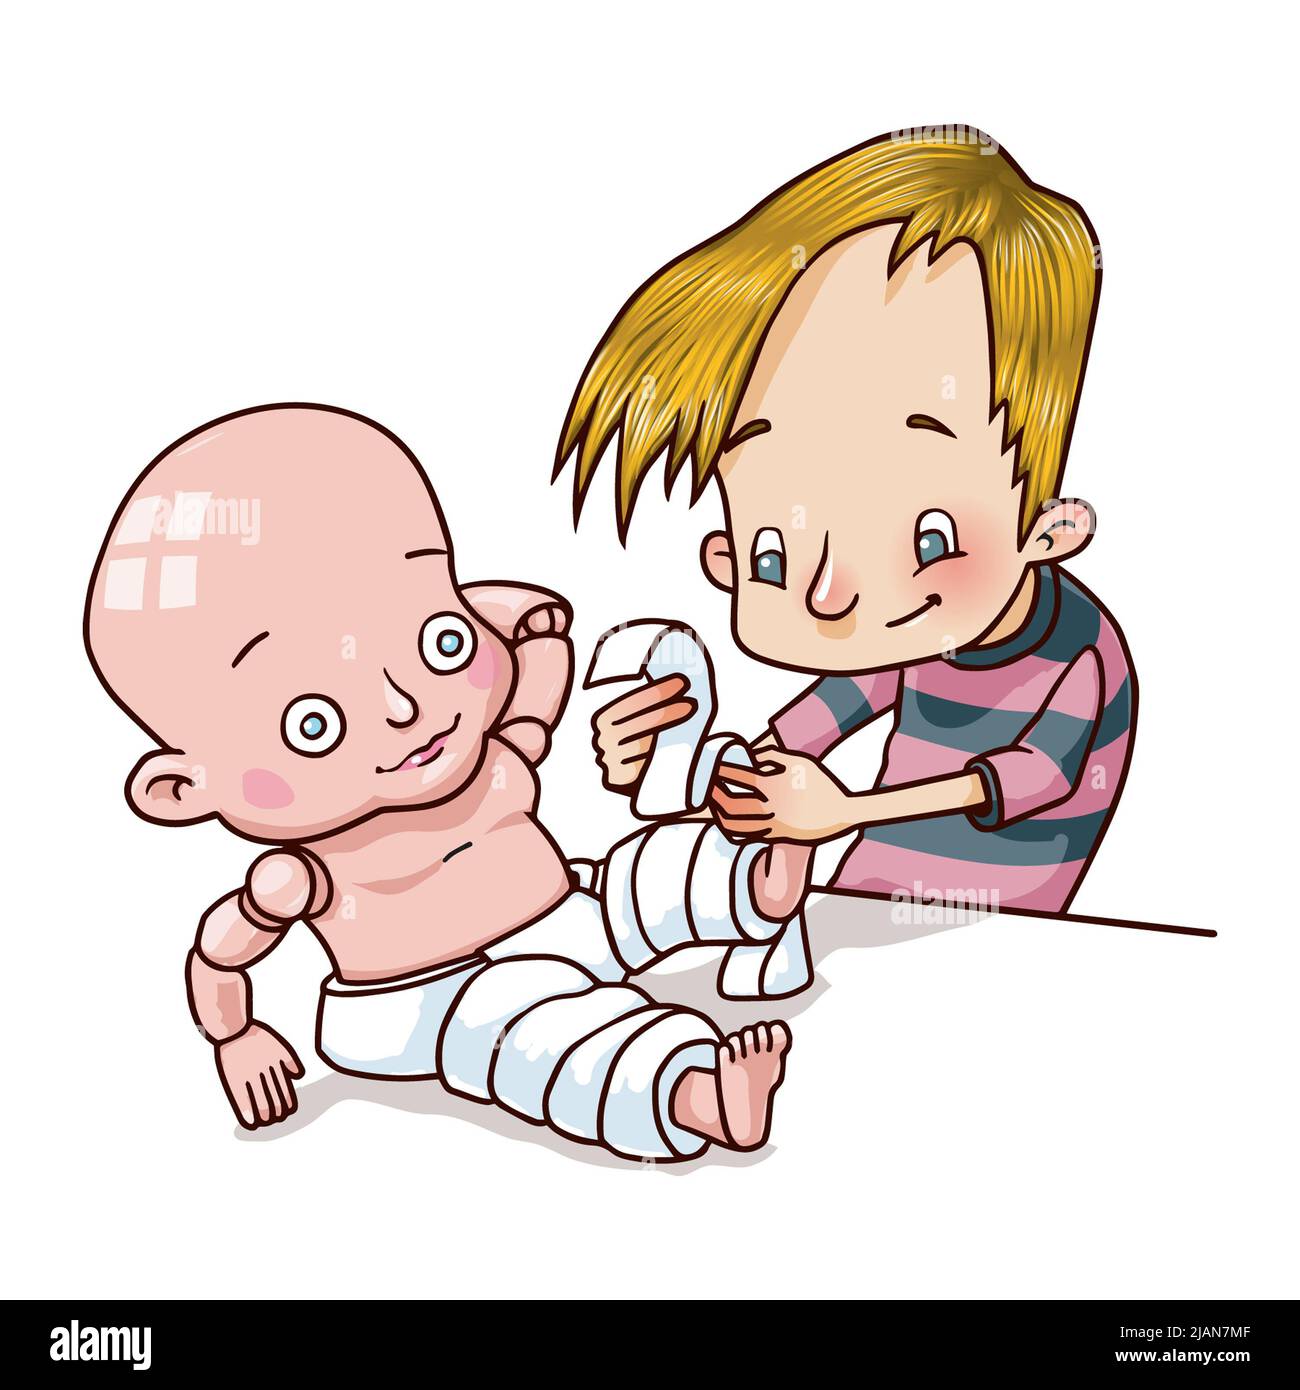 Concept art of young boy playing hospital by bandaging a doll, illustrating importance of educational role play, active learning learning through play Stock Photo